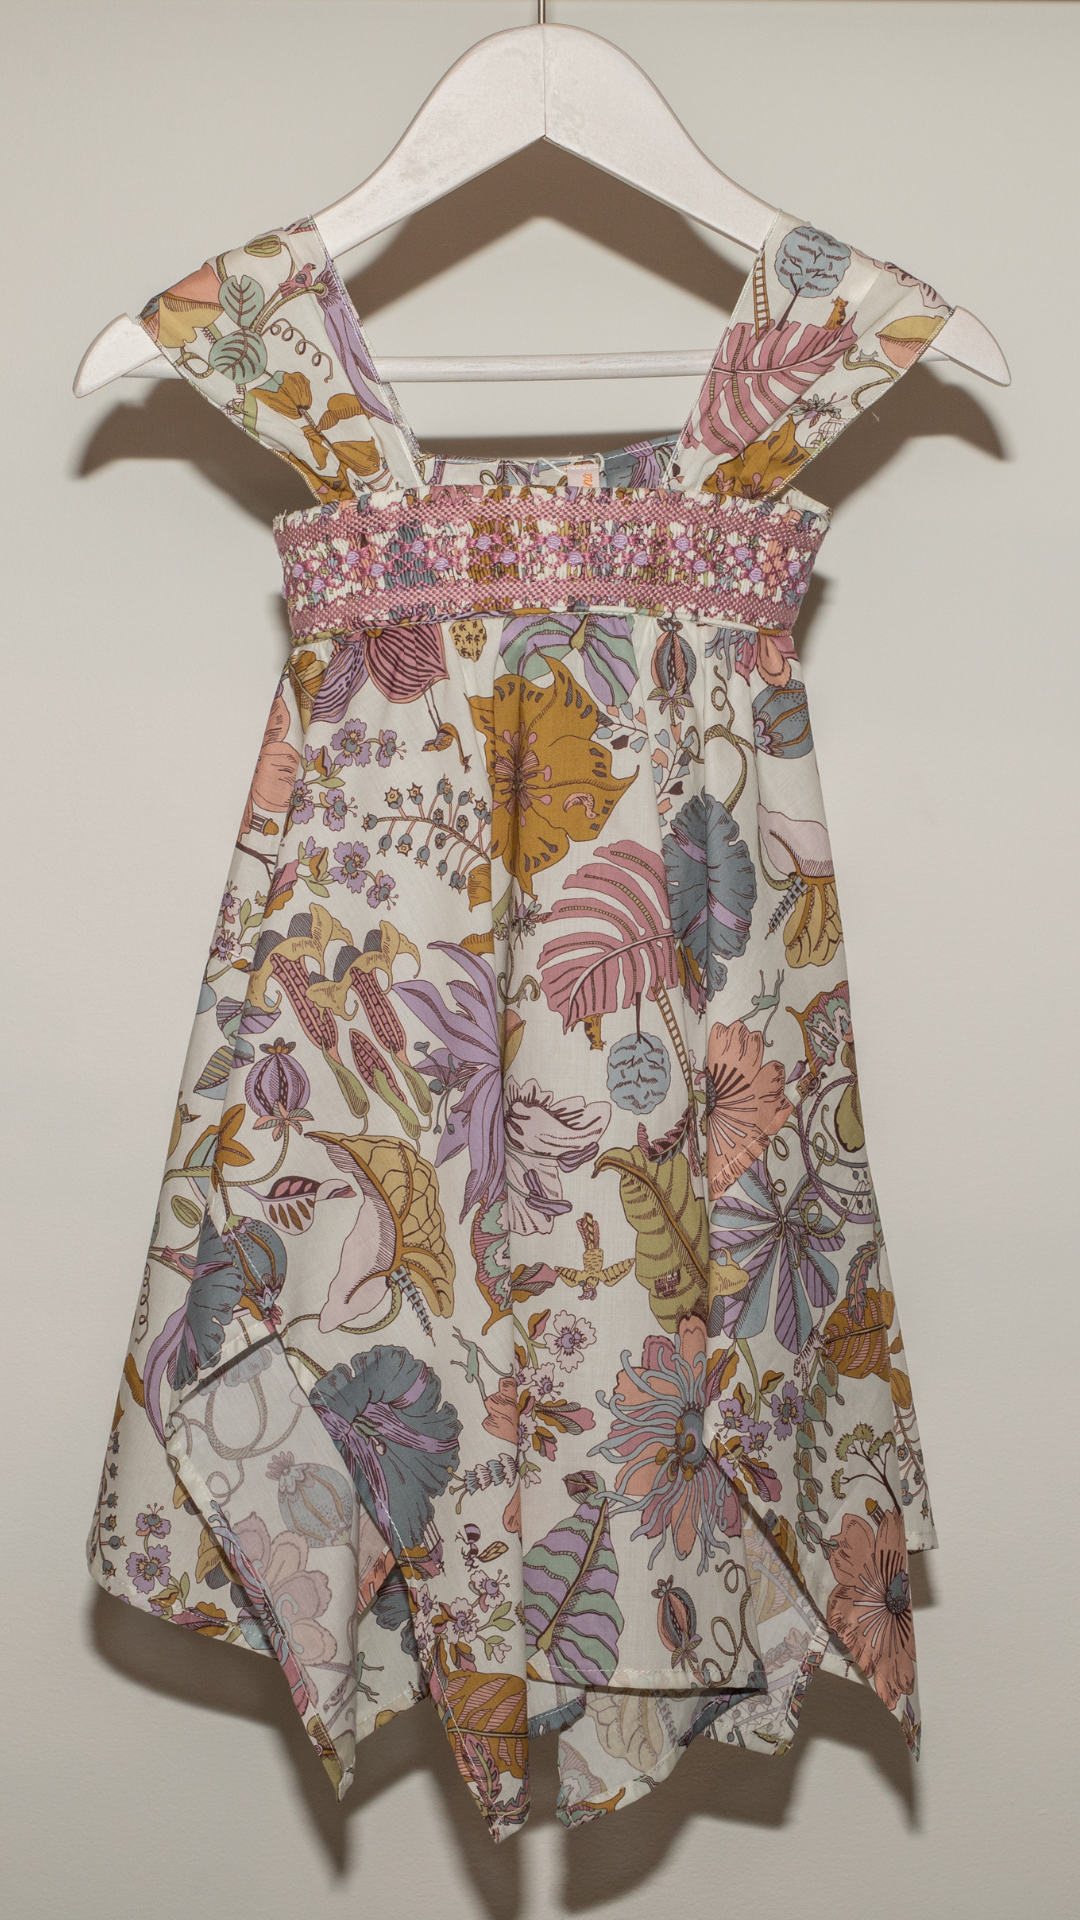 ASYMMETRIC STRAPPY HAND EMBROIDERED DRESS IN VIOLET LIBERTY FABRIC